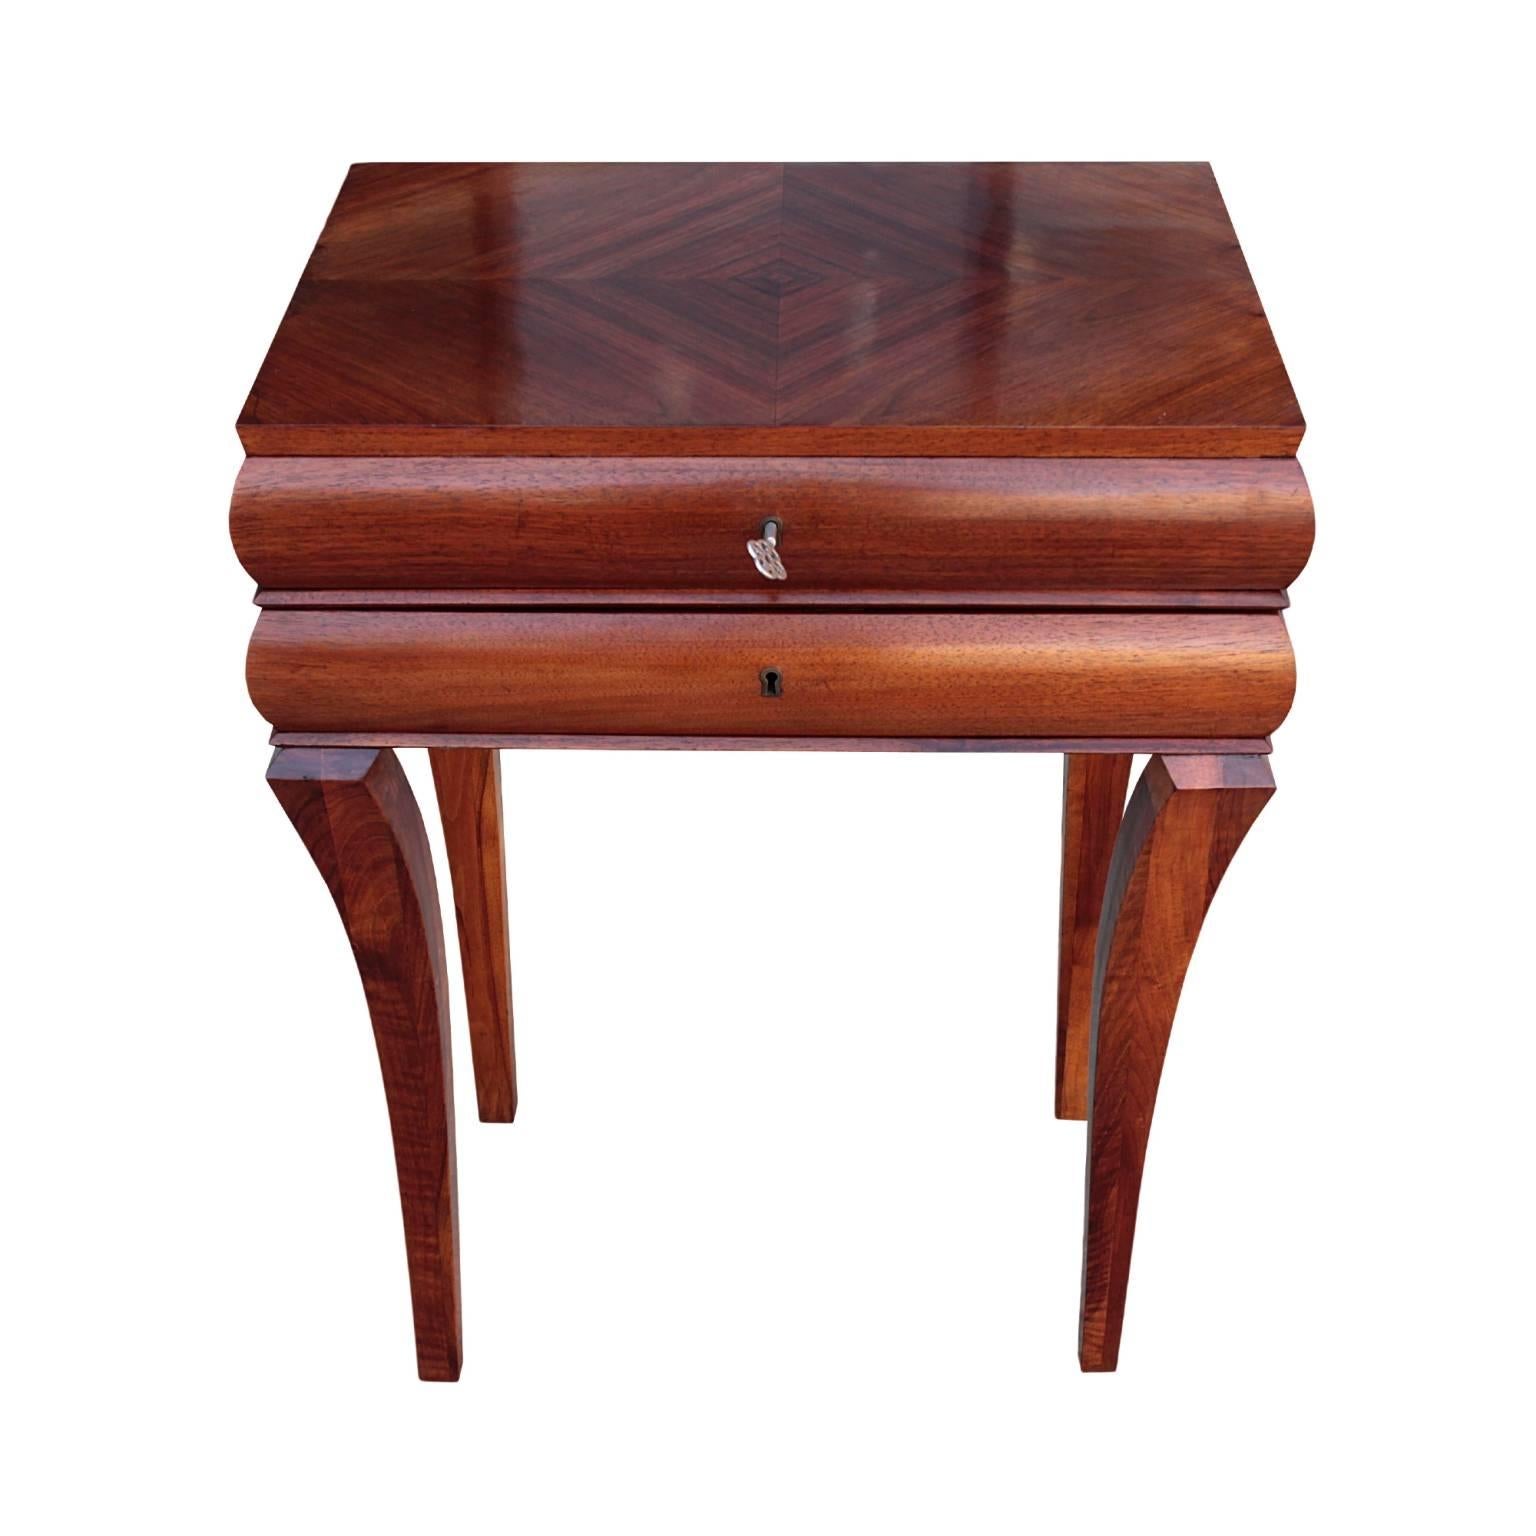 Rare and fine German Art Deco period beautifully sculpted side table featuring rectangular bookmatched top resting on two joined bombe segments, each enclosing a drawer. The whole raised on four shaped in-curving and tapering sabre legs. In